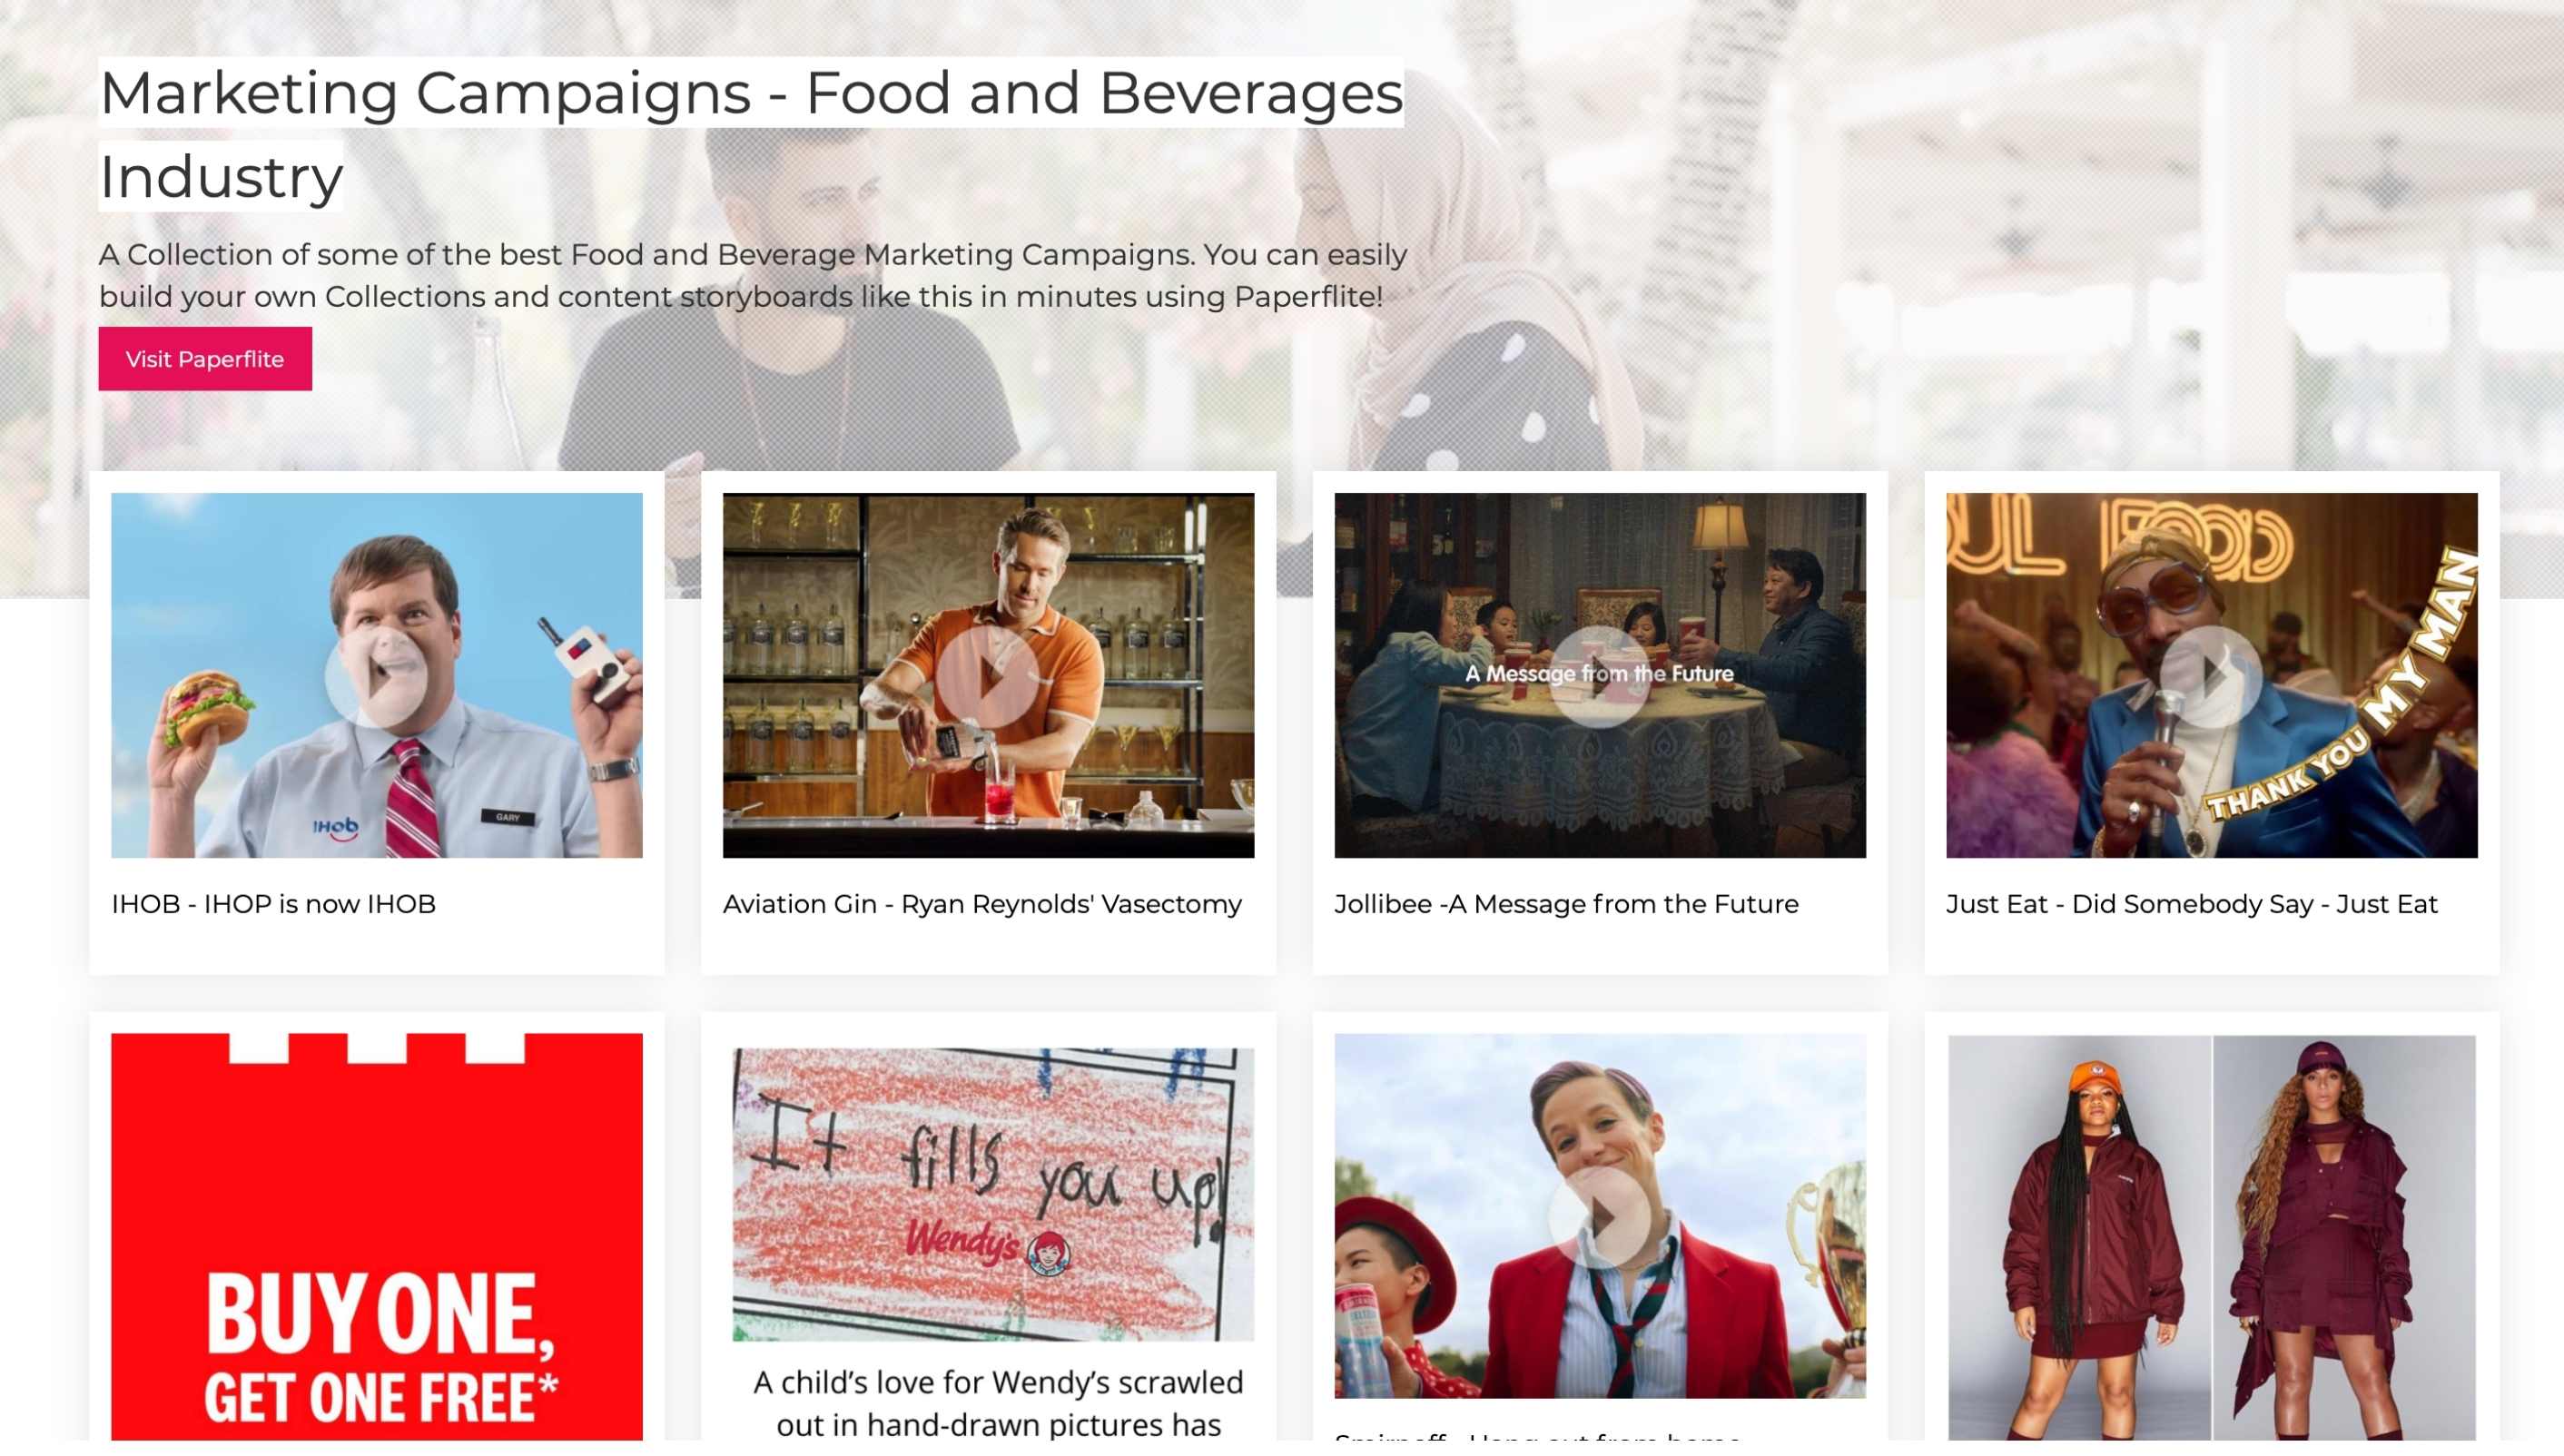 A Paperflite collection of Marketing Campaign examples in the Food and Beverages industry